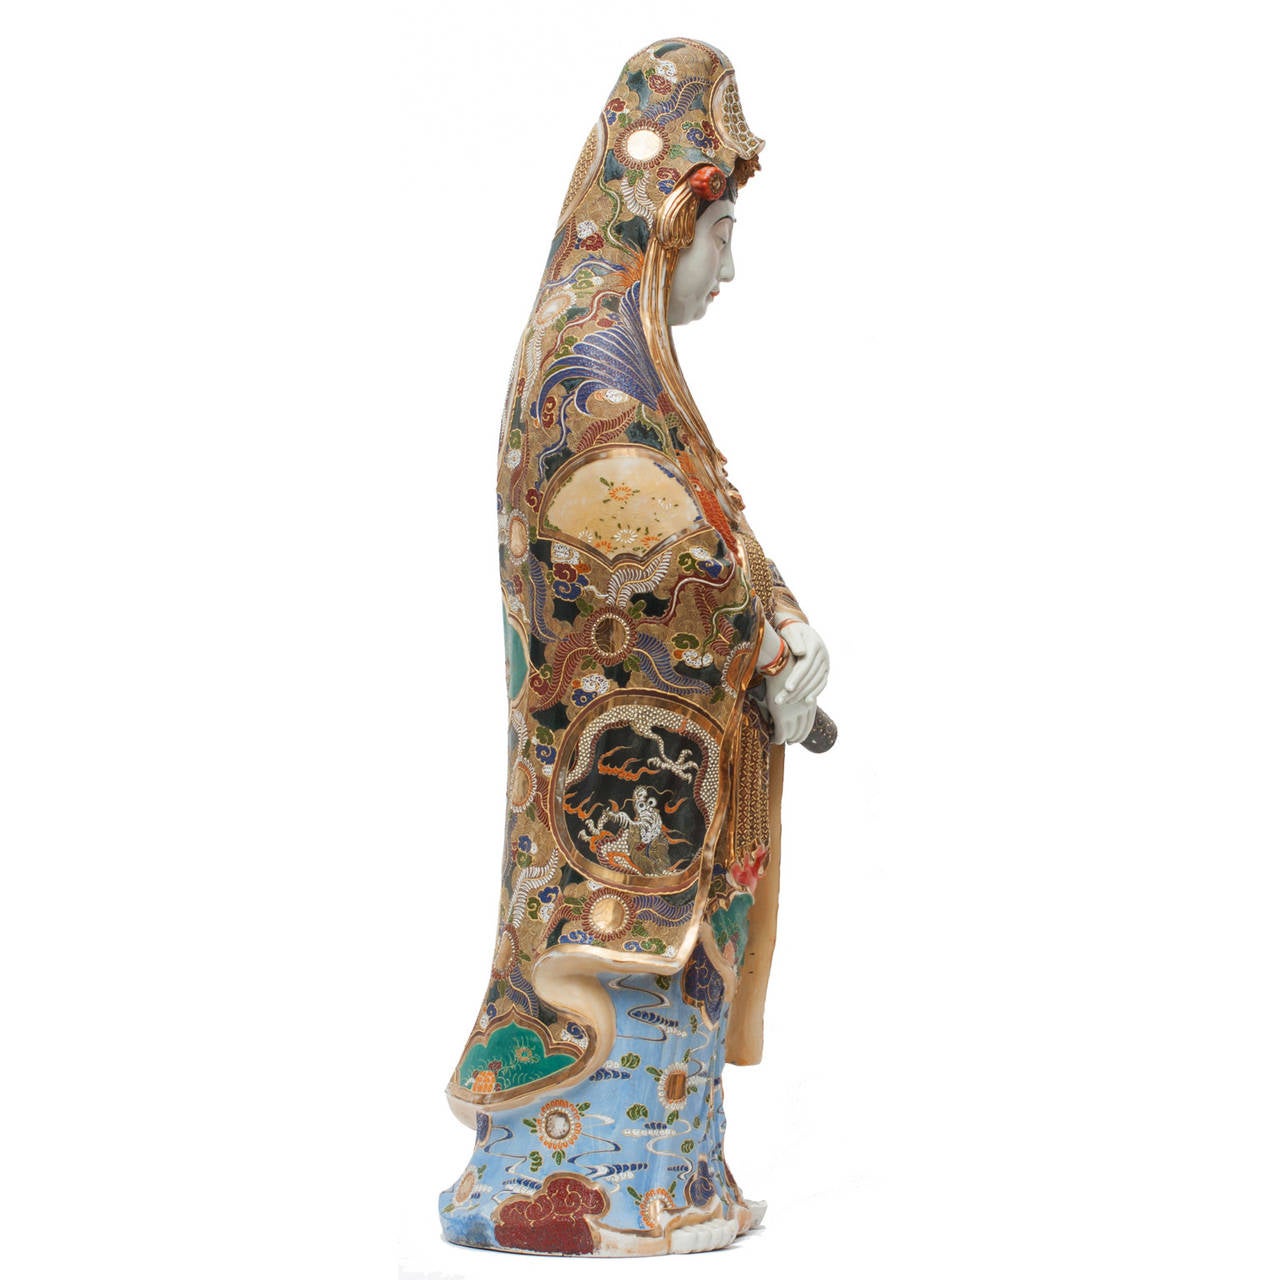 A stunning and dramatic Kutani statue of the Bodhisattva Kannon, measuring almost three feet in height. This statue presents some of Kutani's finest craftsmanship with exceptional hand-painted detail covering the entire surface.

Made for the